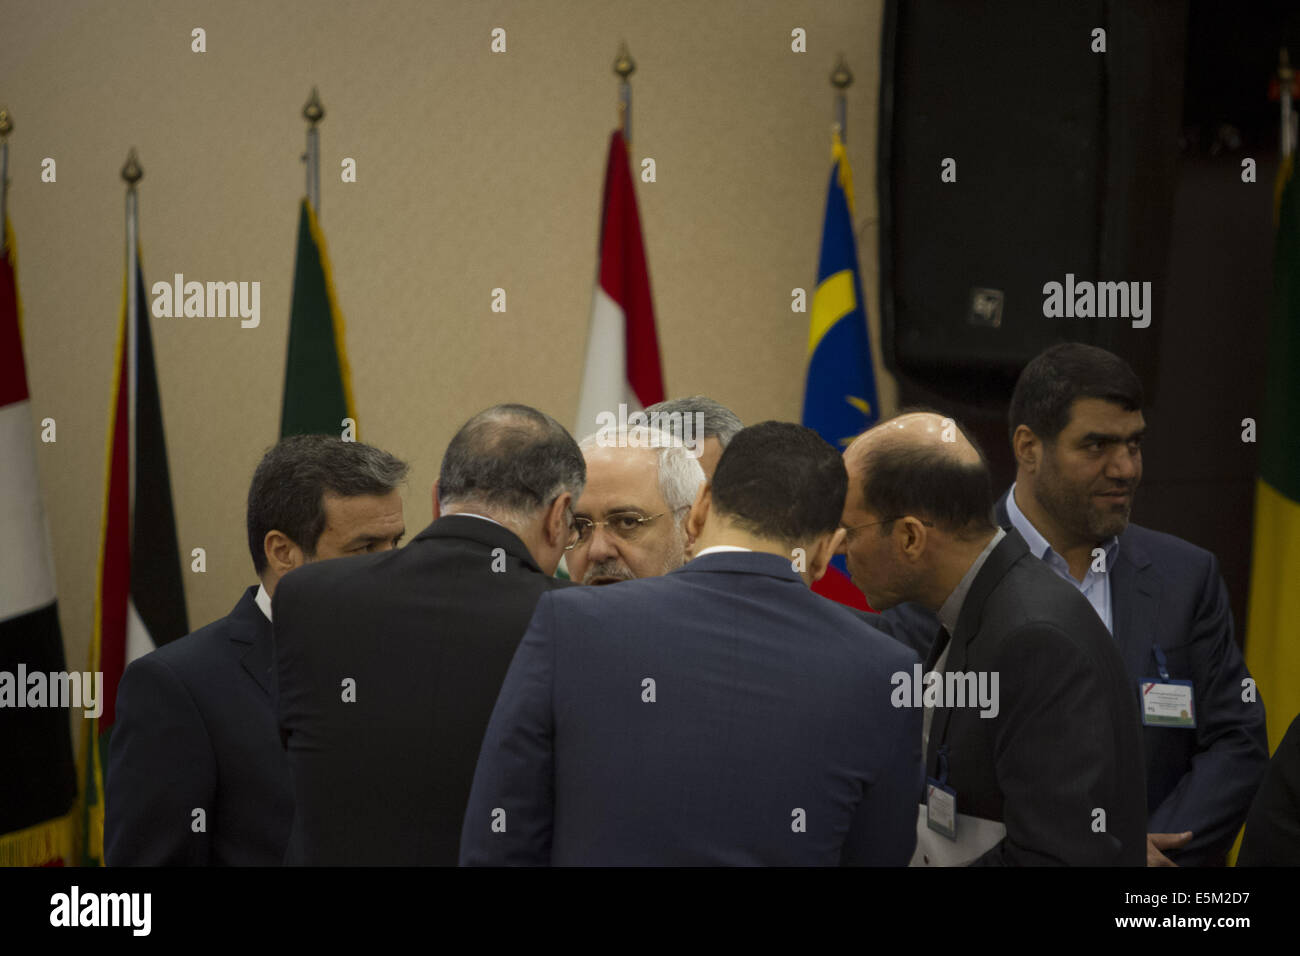 Tehran, Iran. 4th Aug, 2014. August 4, 2014 - Tehran, Iran - Iran's Foreign Minister MOHAMMAD JAVAD ZARIF (C) surrounded by the Iranian officials as he attend the opening of Non-Aligned Movement Ministerial Committee on Palestine Meeting on Situation in Gaza, in Tehran. Morteza Nikoubazl/ZUMAPRESS Credit:  Morteza Nikoubazl/ZUMA Wire/Alamy Live News Stock Photo